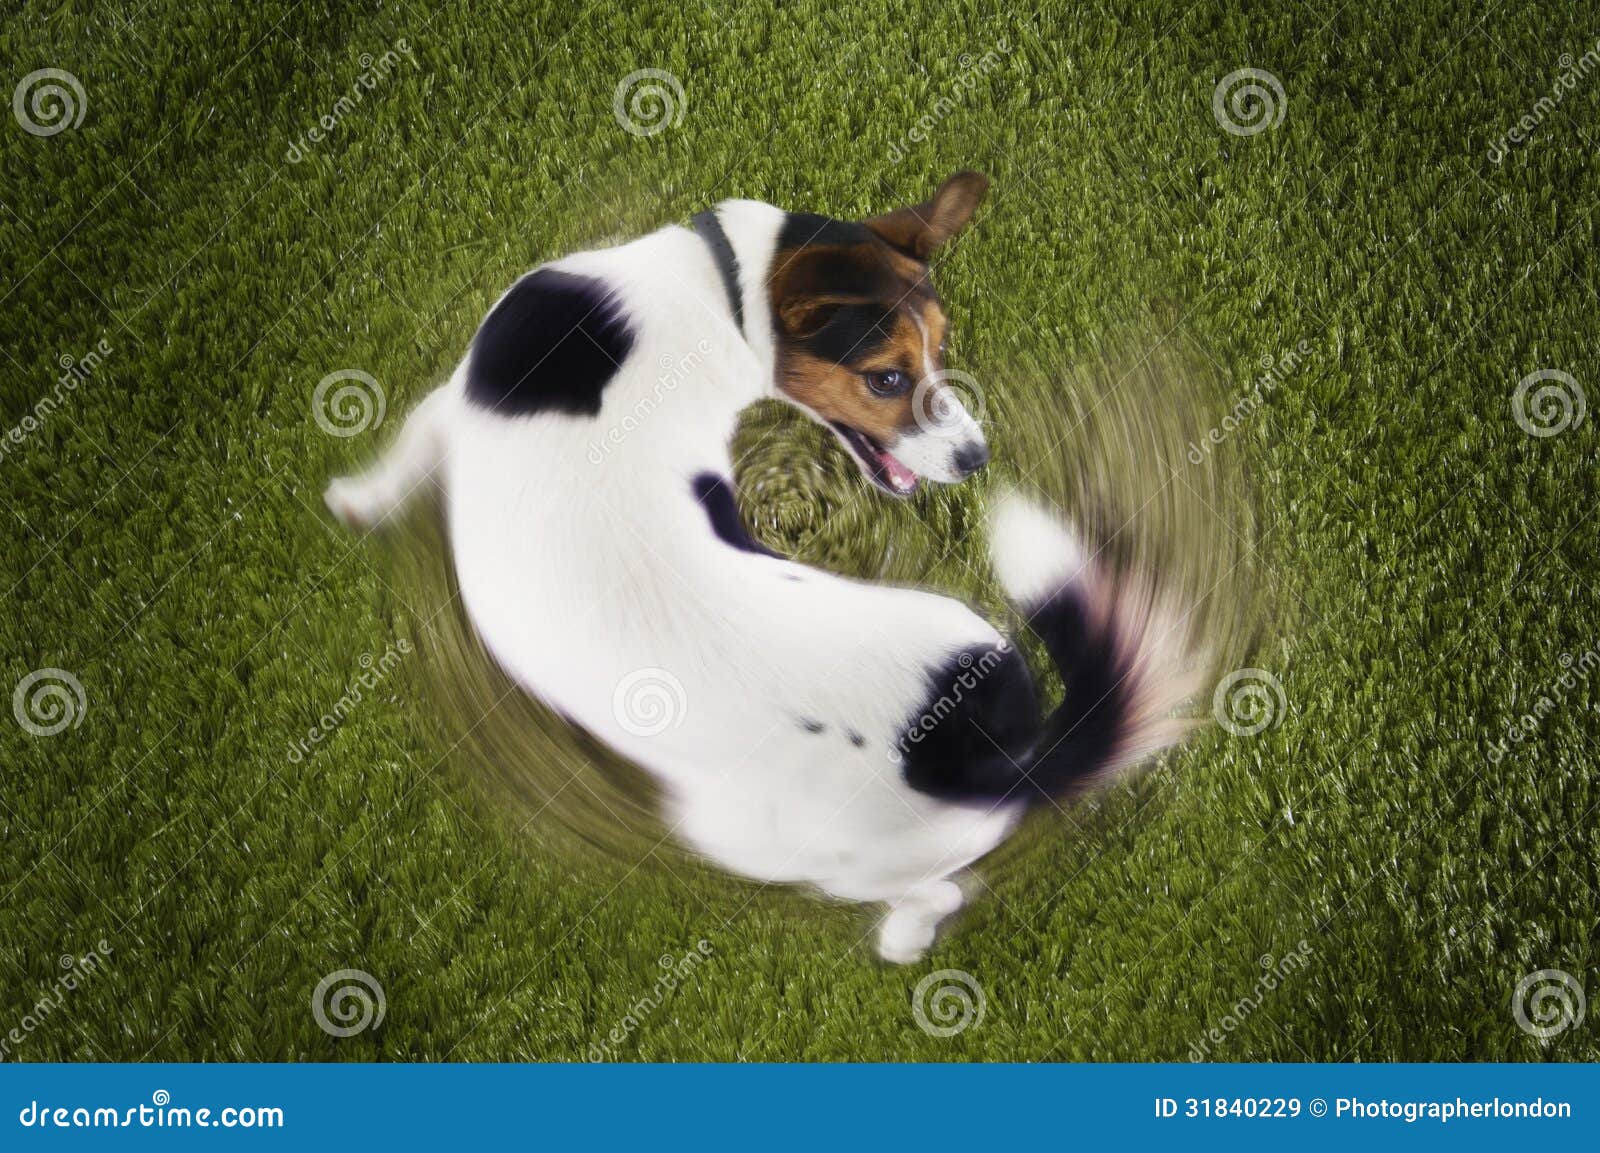 jack russell terrier chasing tail